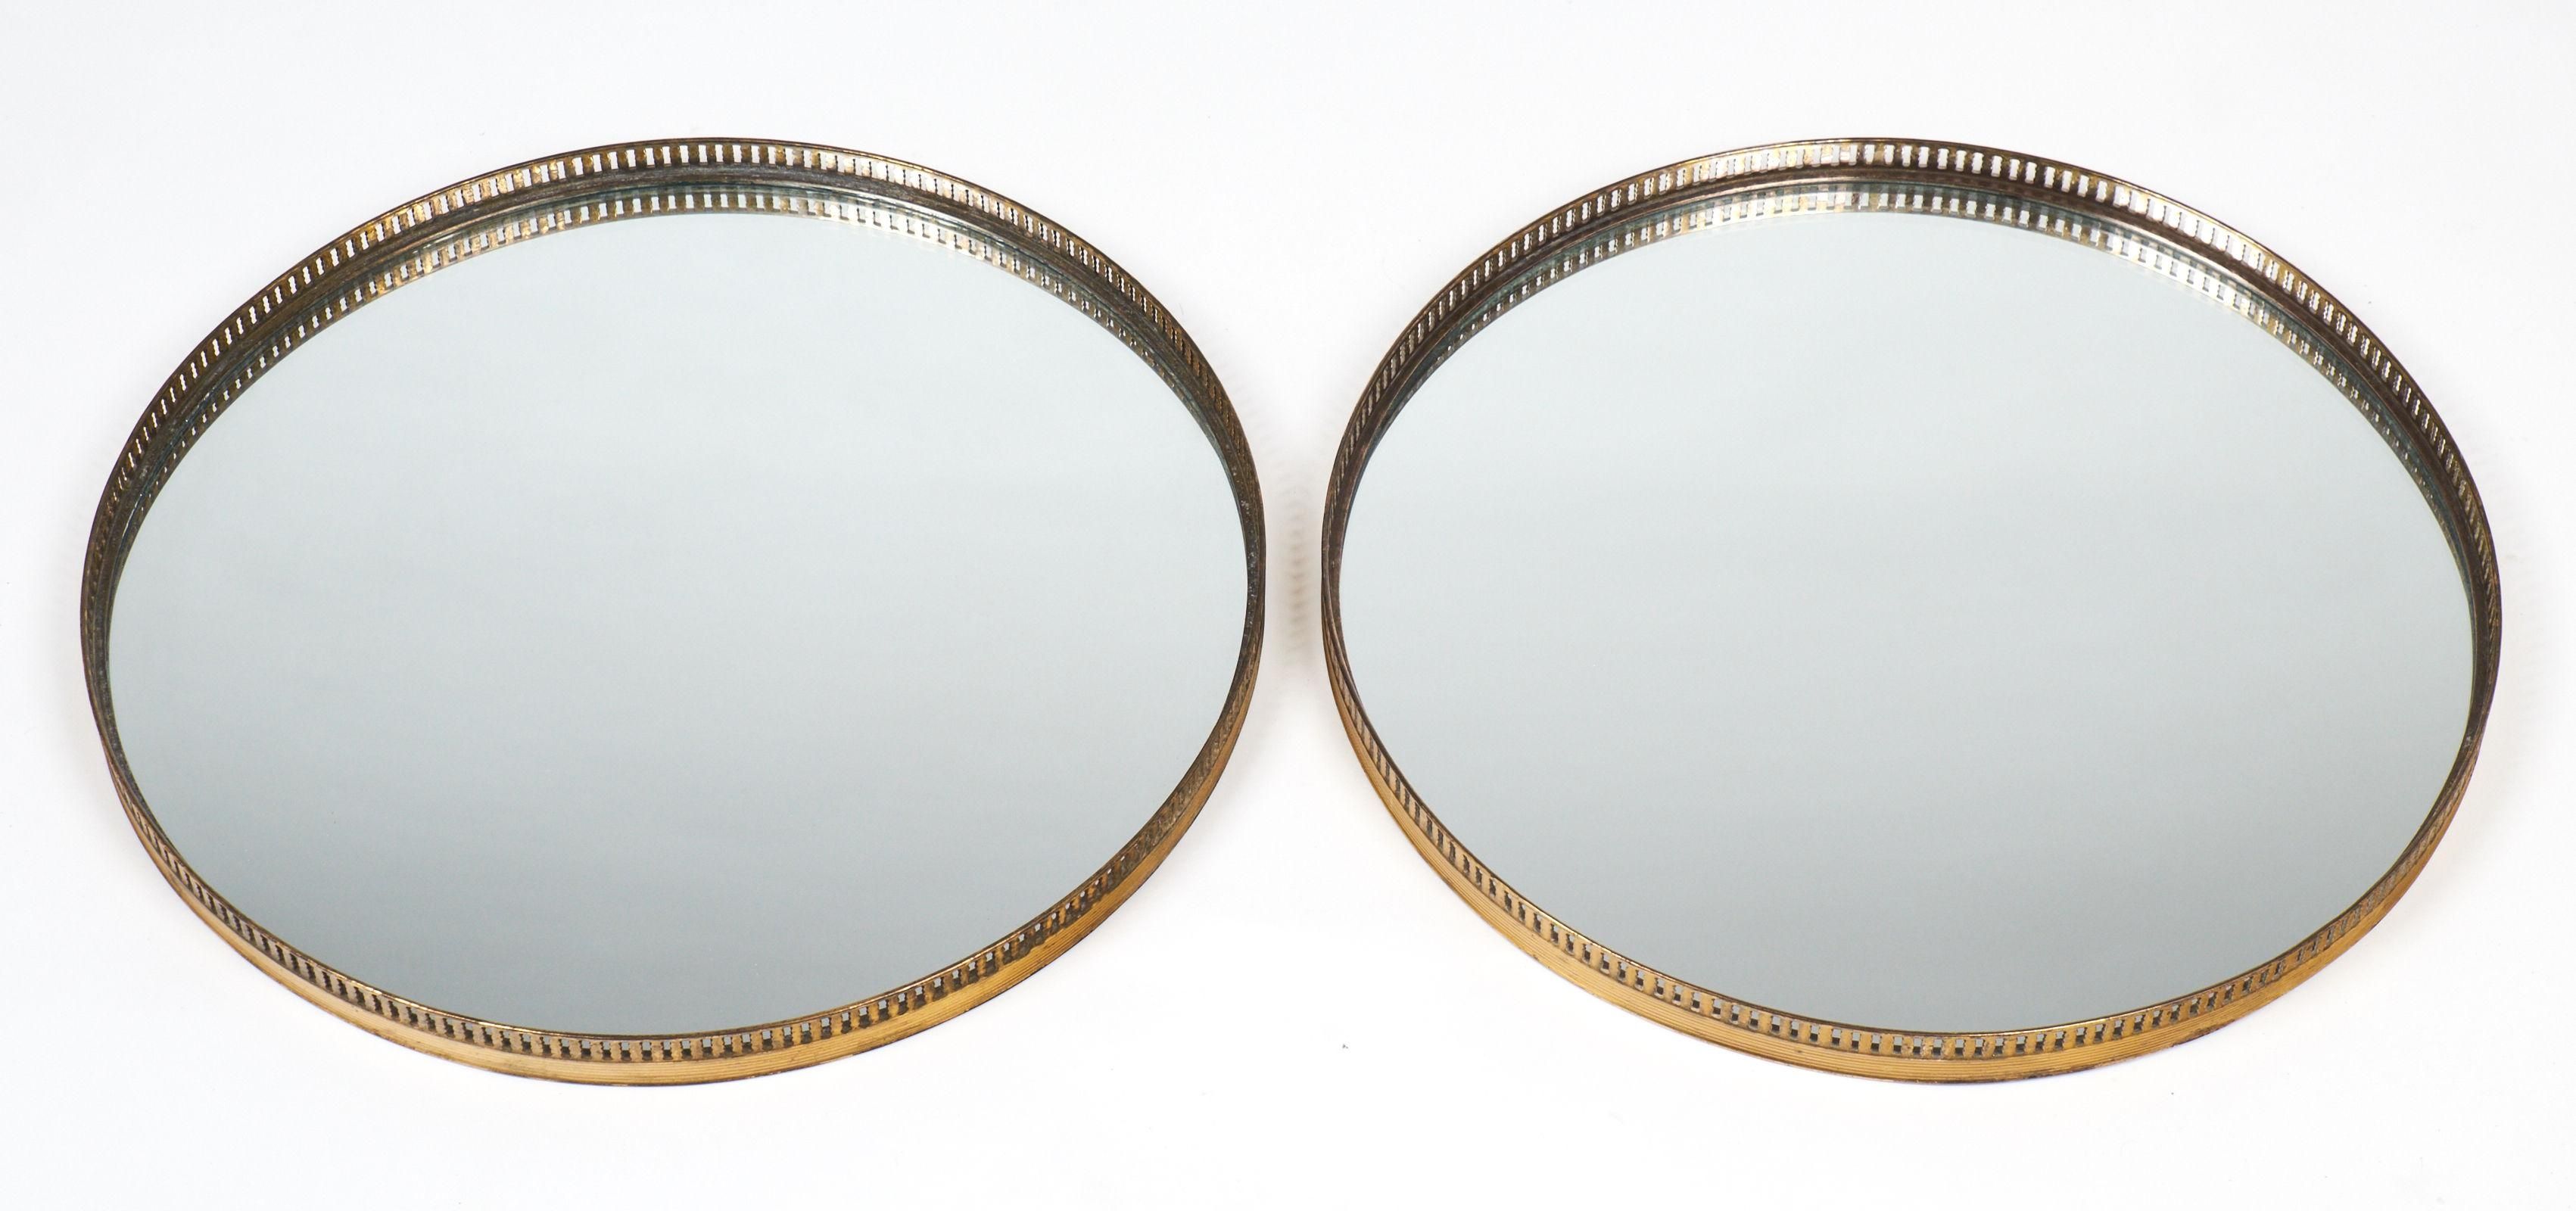 Antique Brass Gallery Round Wall Mirrors – Jean Marc Fray Inside Vintage Wall Mirrors (View 19 of 20)